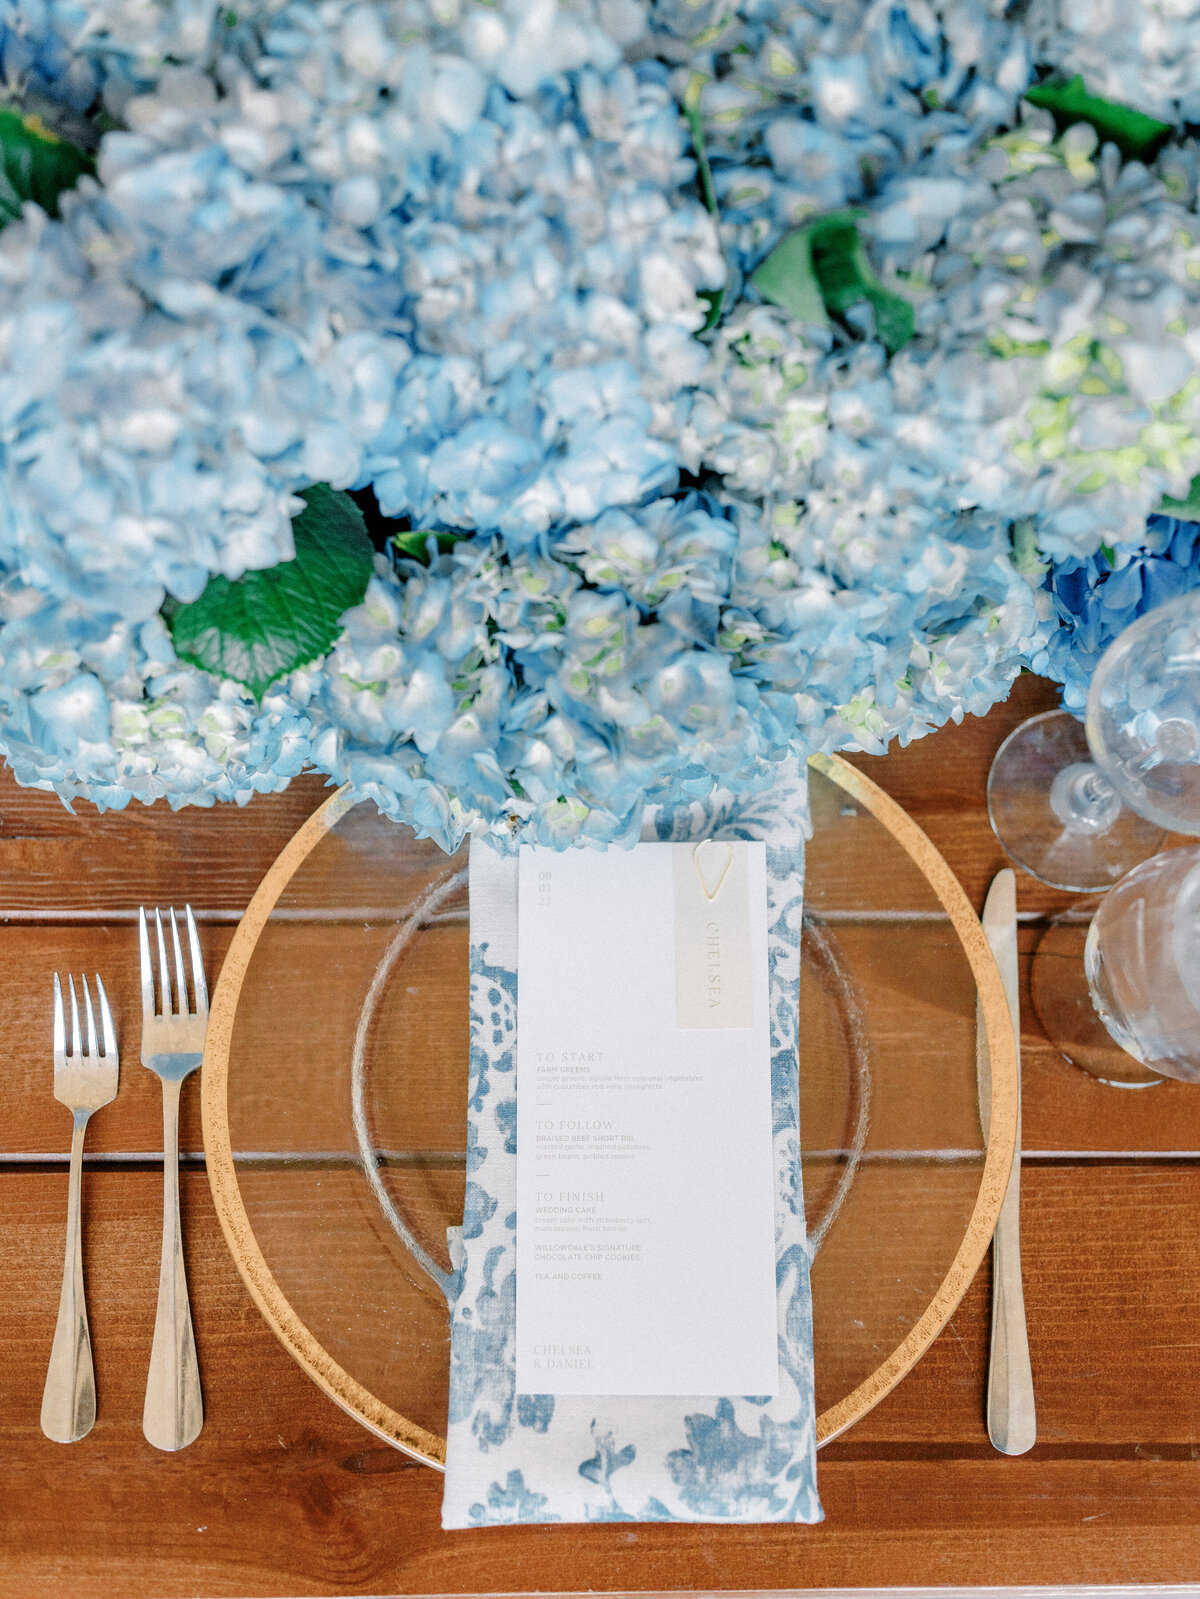 Reception table setting with clear plate, blue and white floral napkin, and blue hydrangea centerpiece